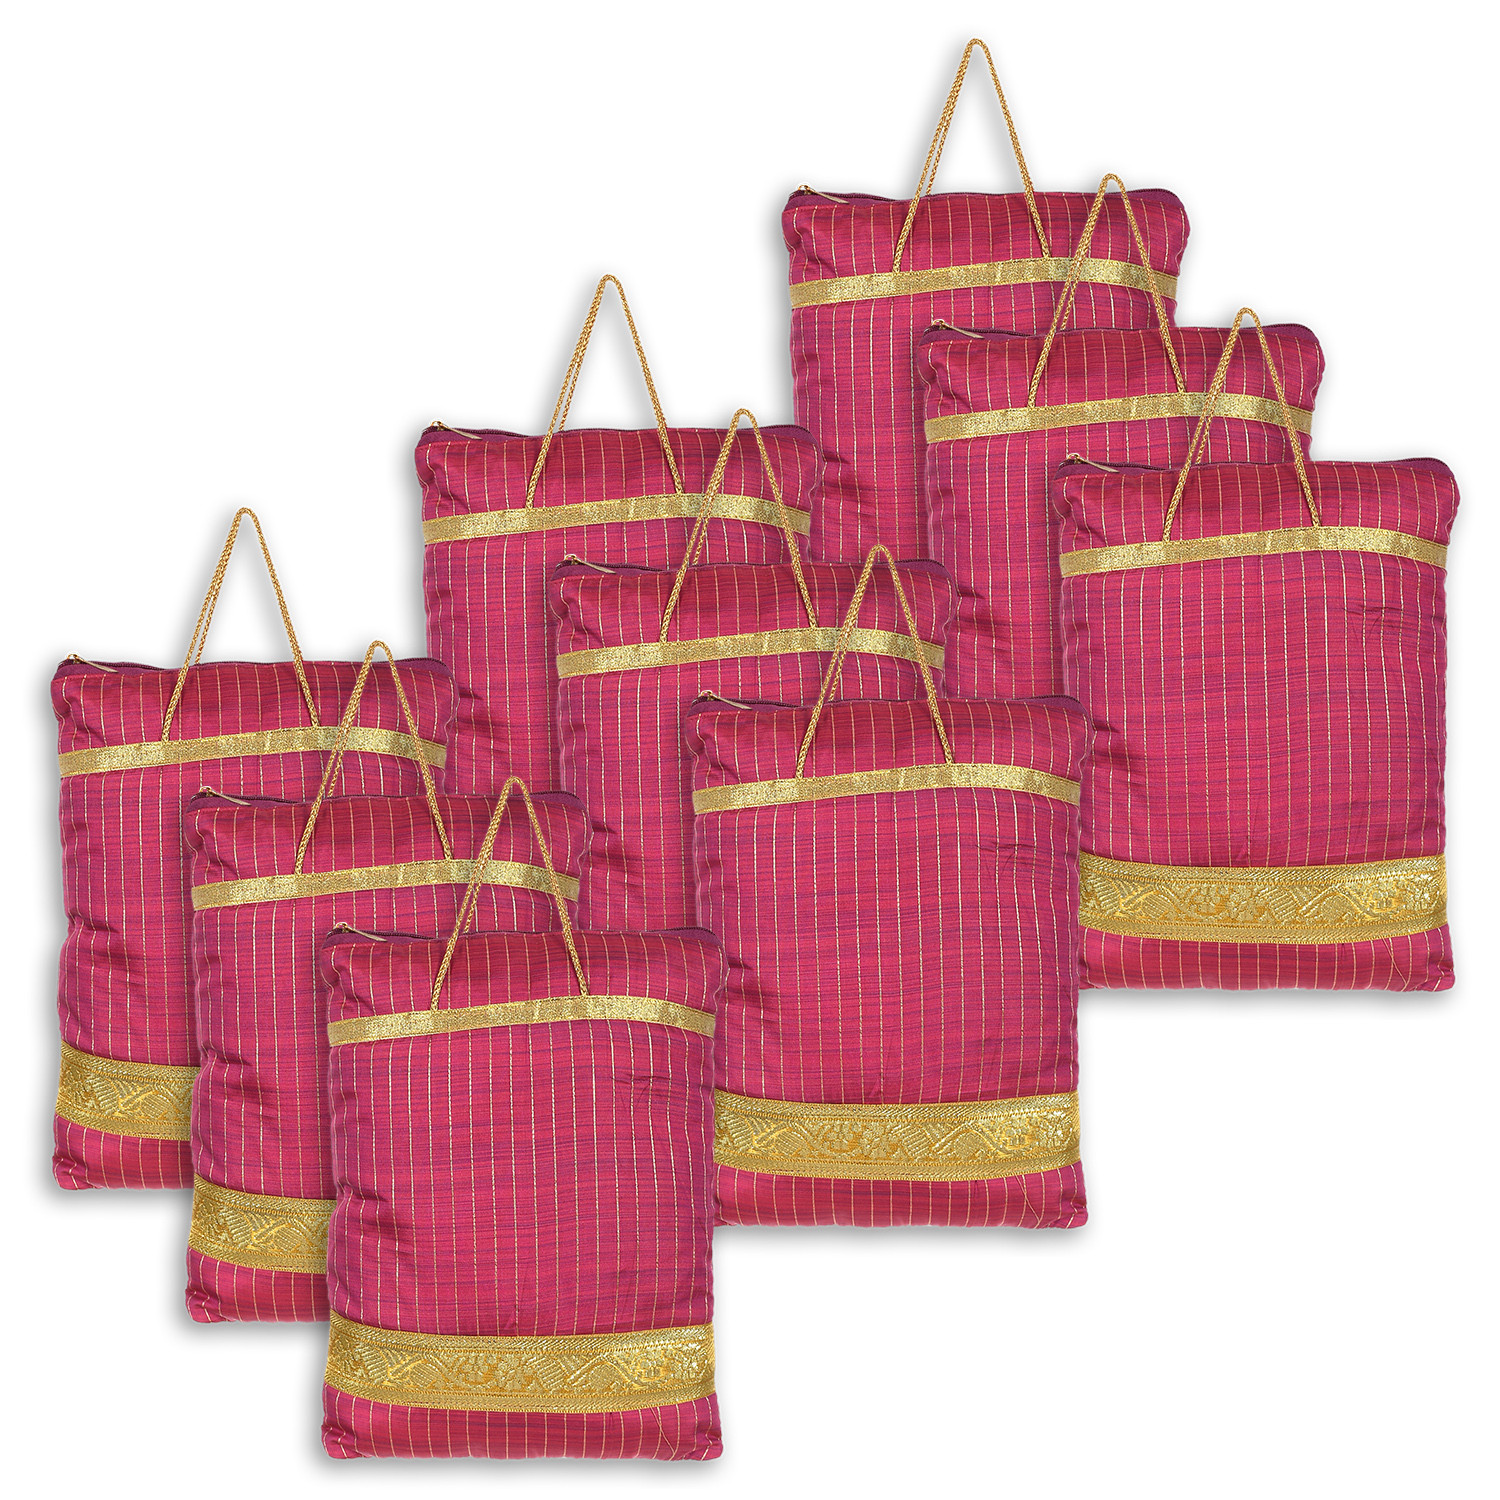 Kuber Industries Polyester Strips Print Hand Bag/Grocery Bag For Women/Girls With Handle(Light Pink) 54KM4045